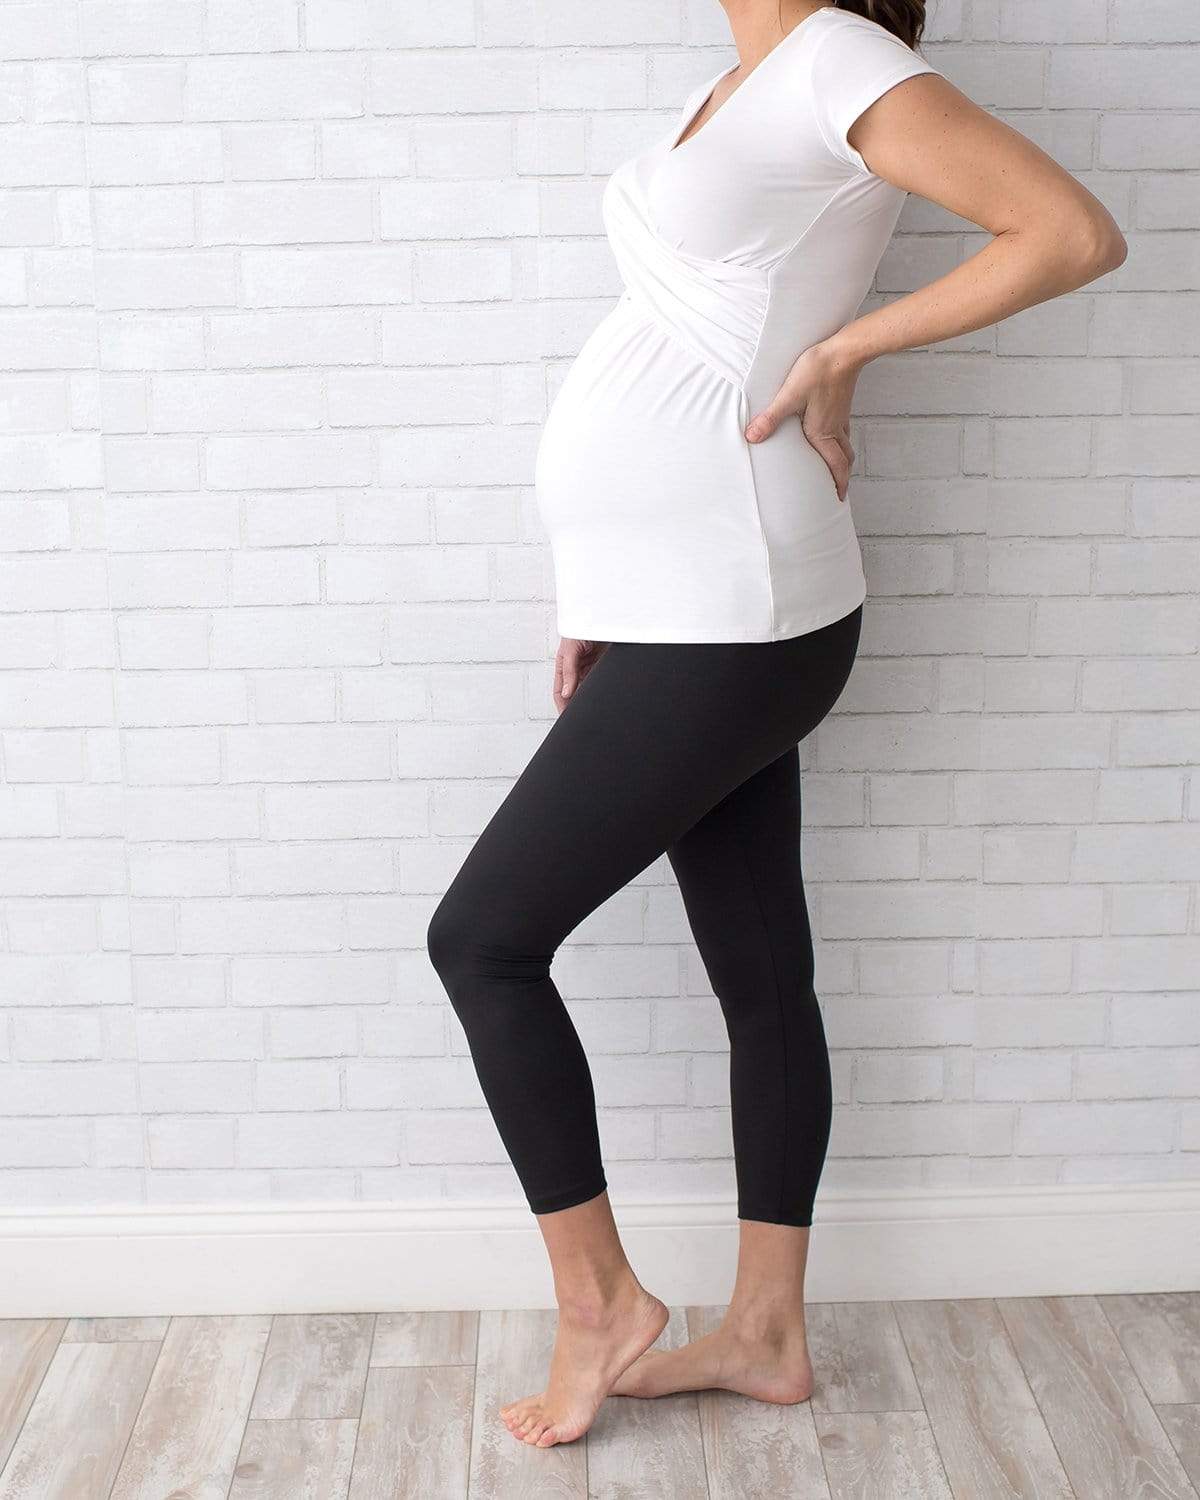 Buy TREND LEVEL Soft Stretchable Cotton Ankle Length Leggings for